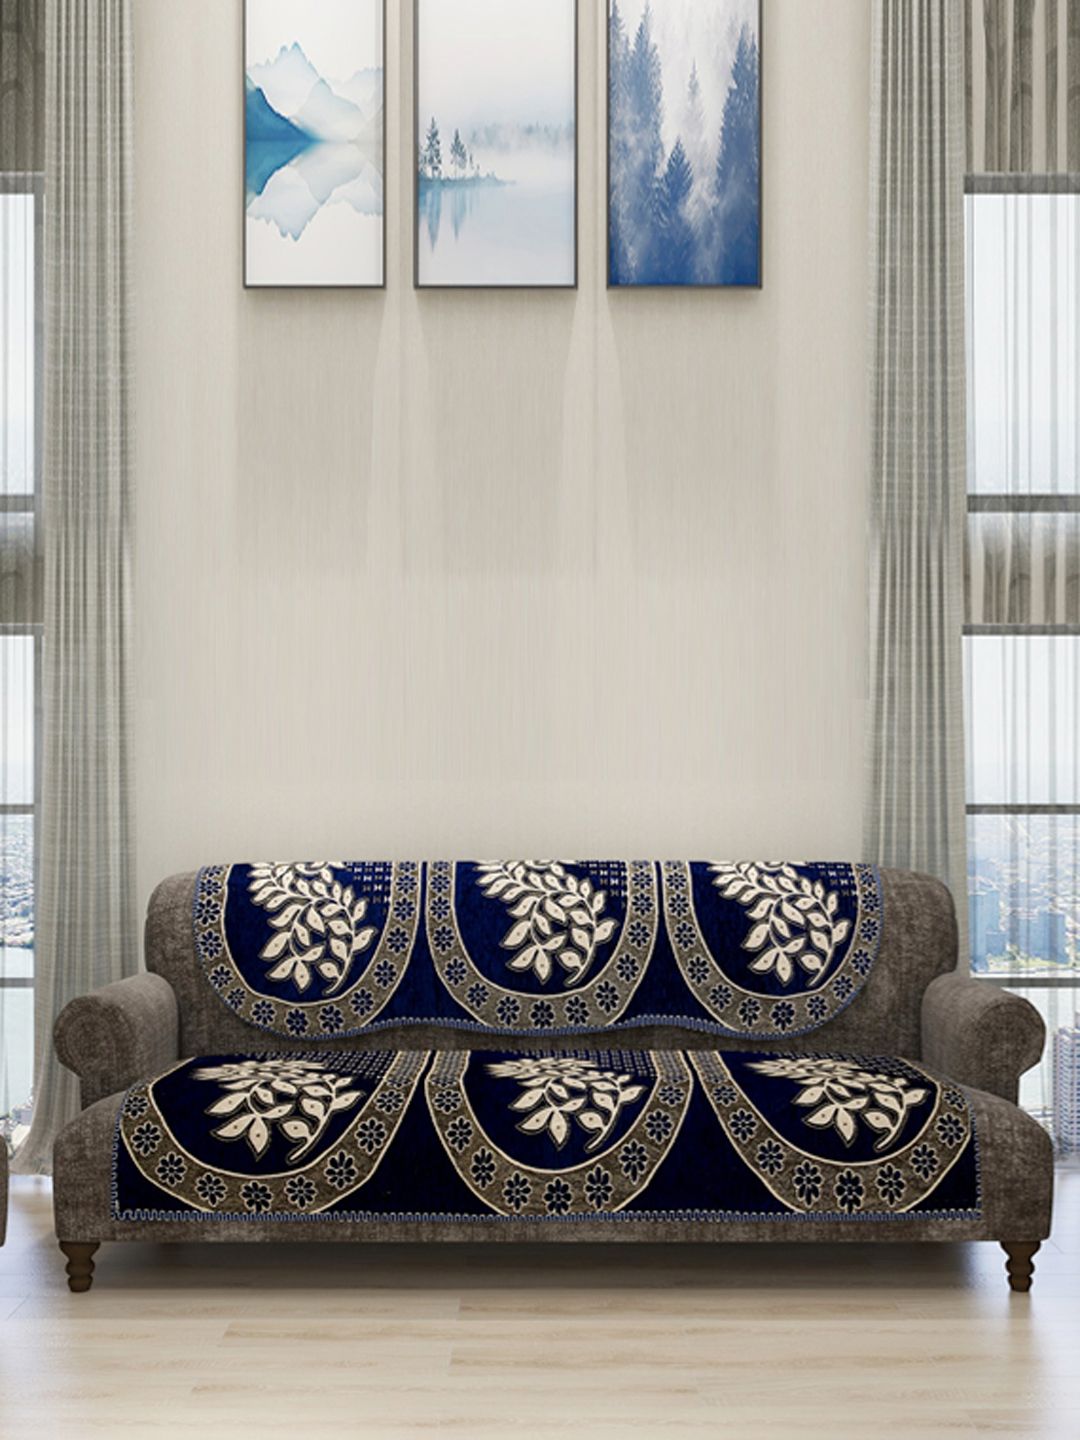 ROMEE 6-Piece Navy Blue & Beige Woven Design Chenille Sofa Set Covers Price in India